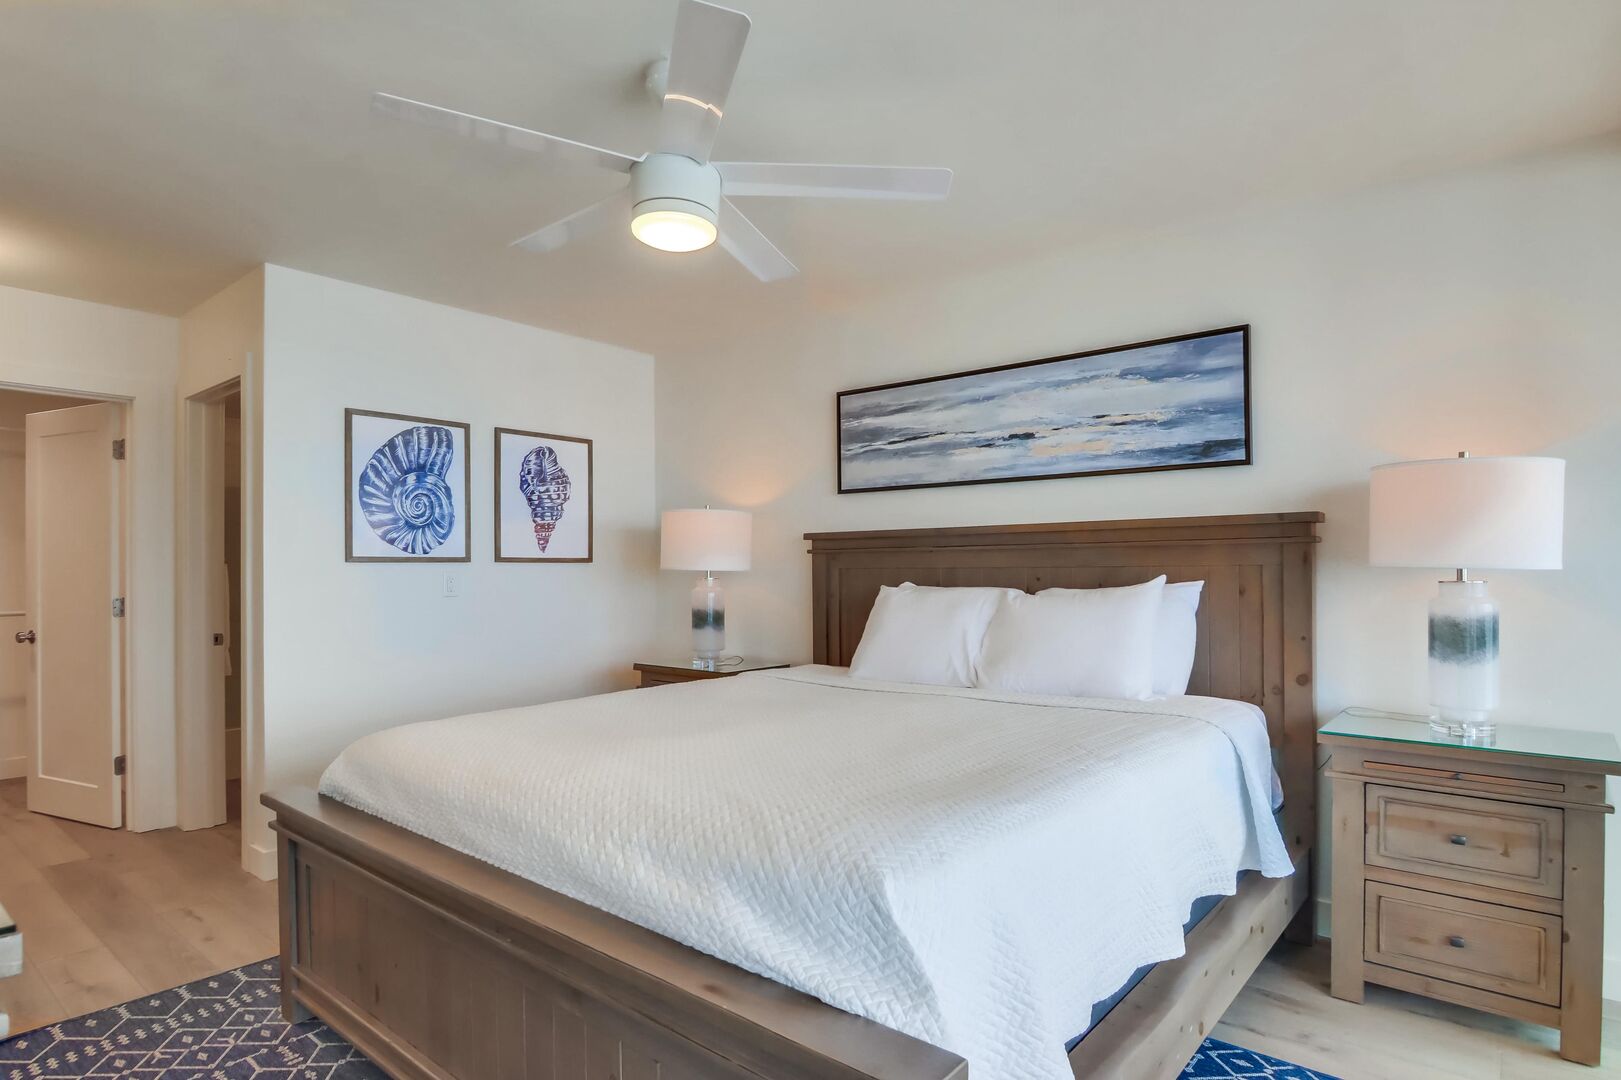 Master bedroom with overhead light/fan, 2 closets (one walk-in) and in-suite bathroom